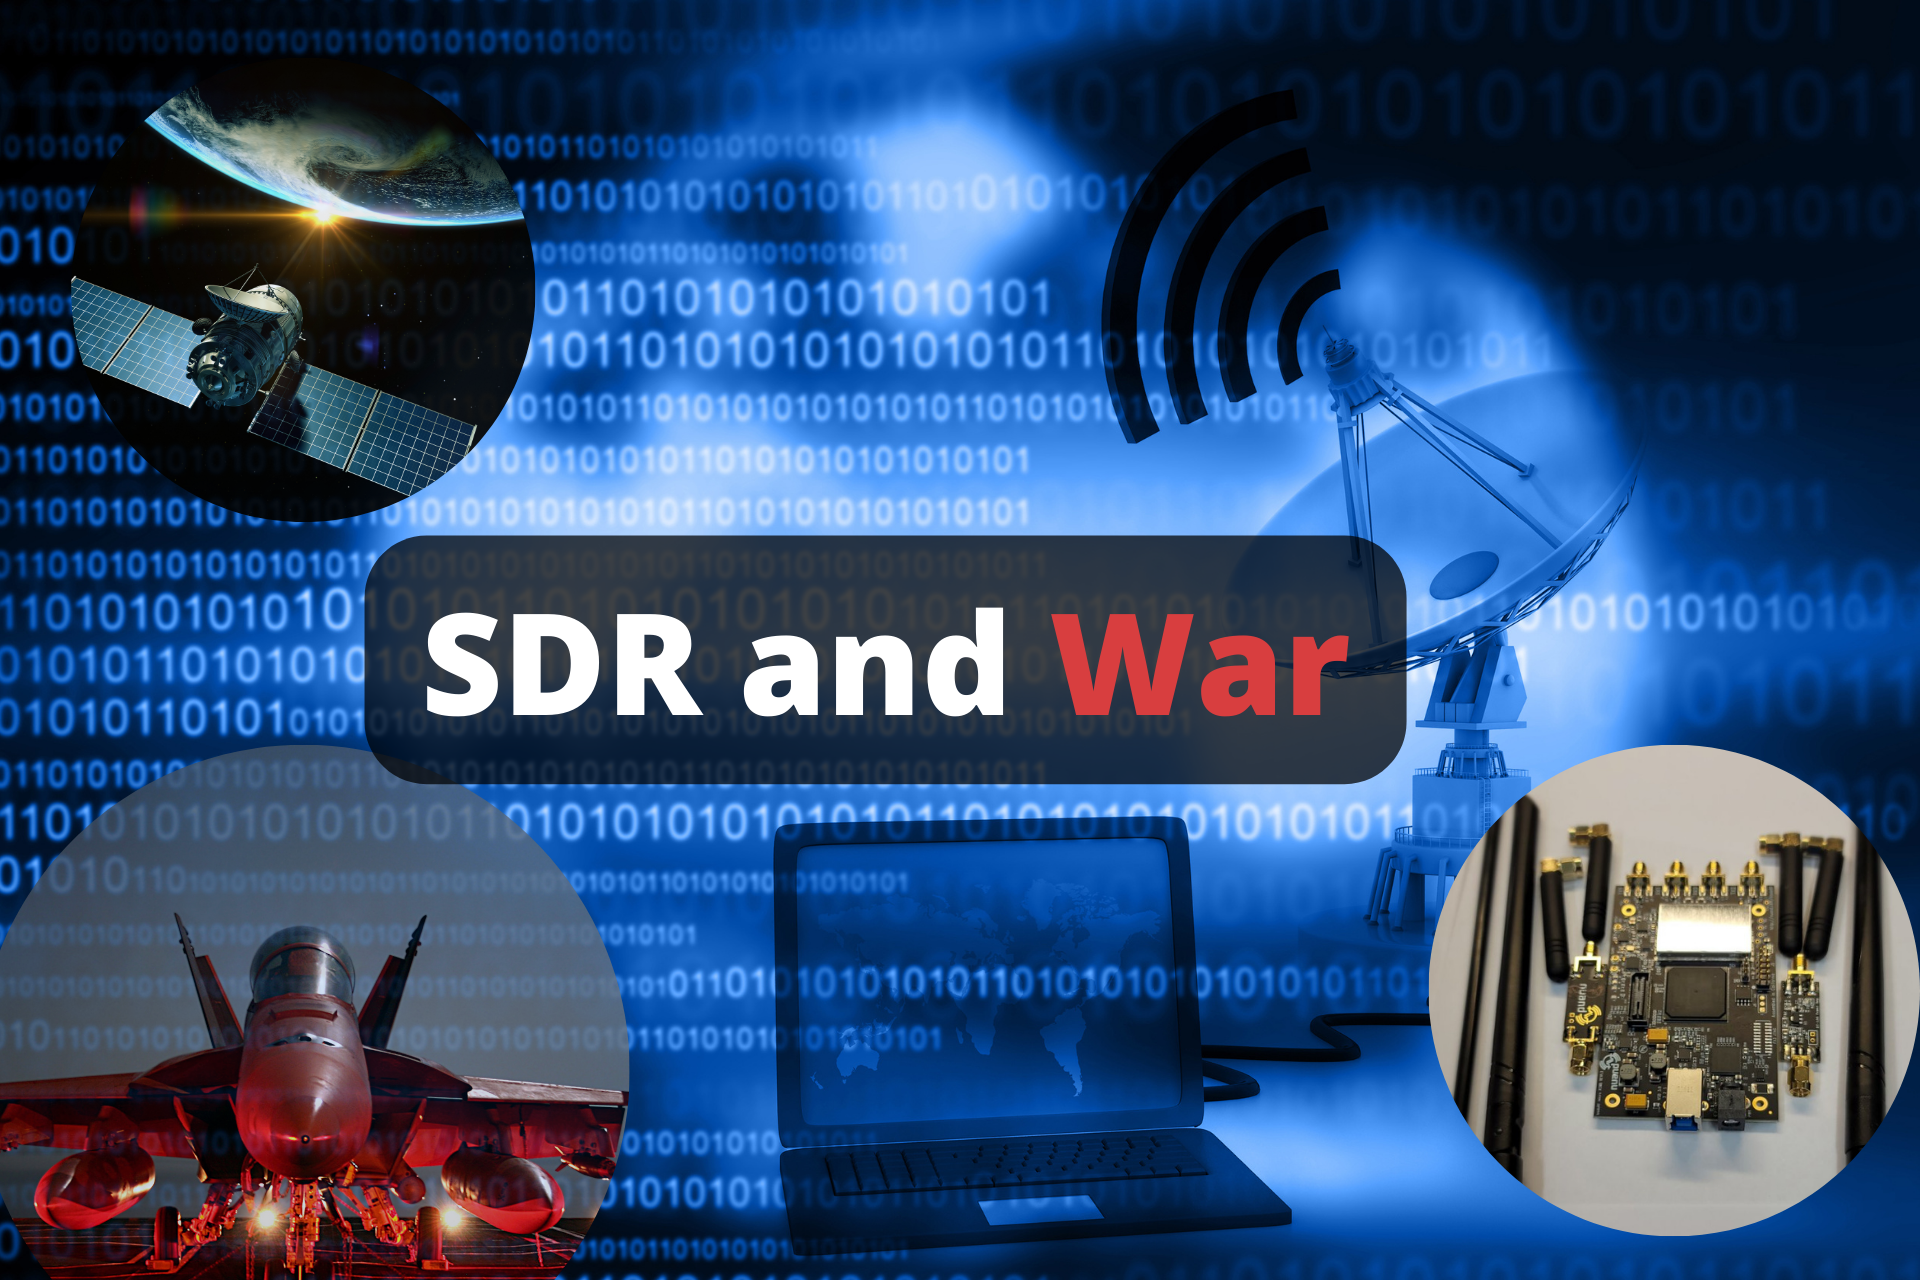 SDR and war